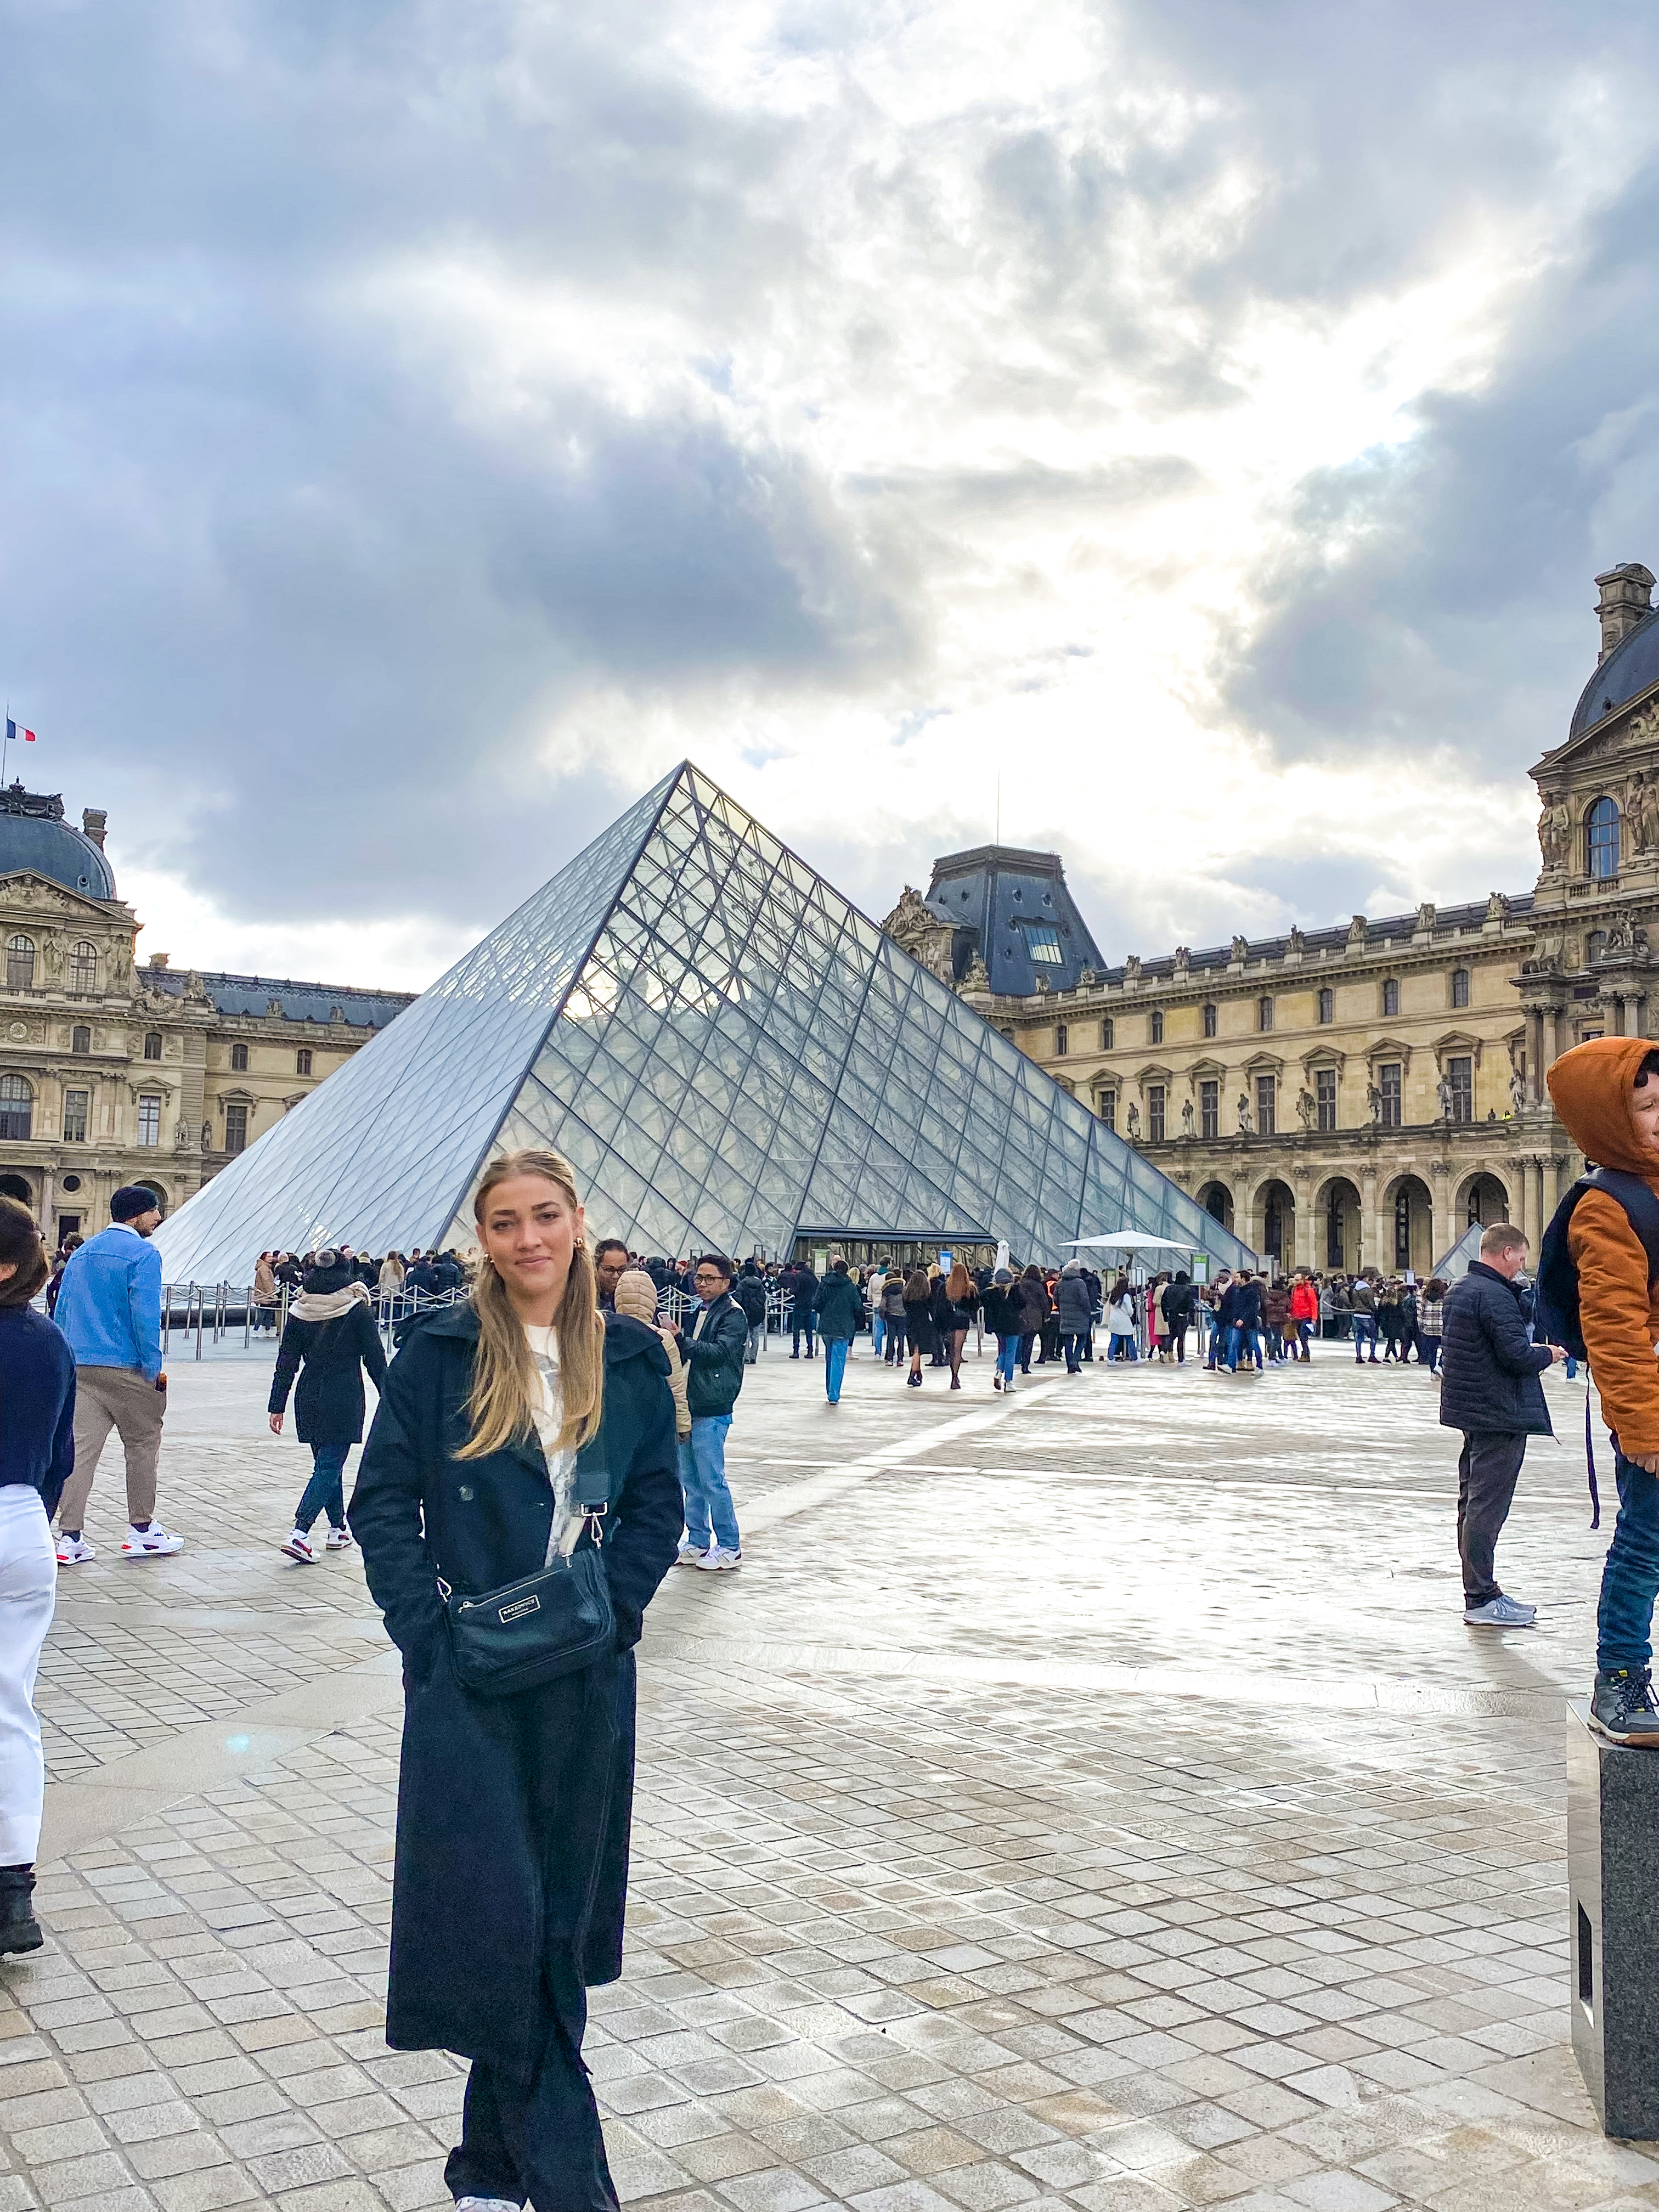 Student at The Louvre